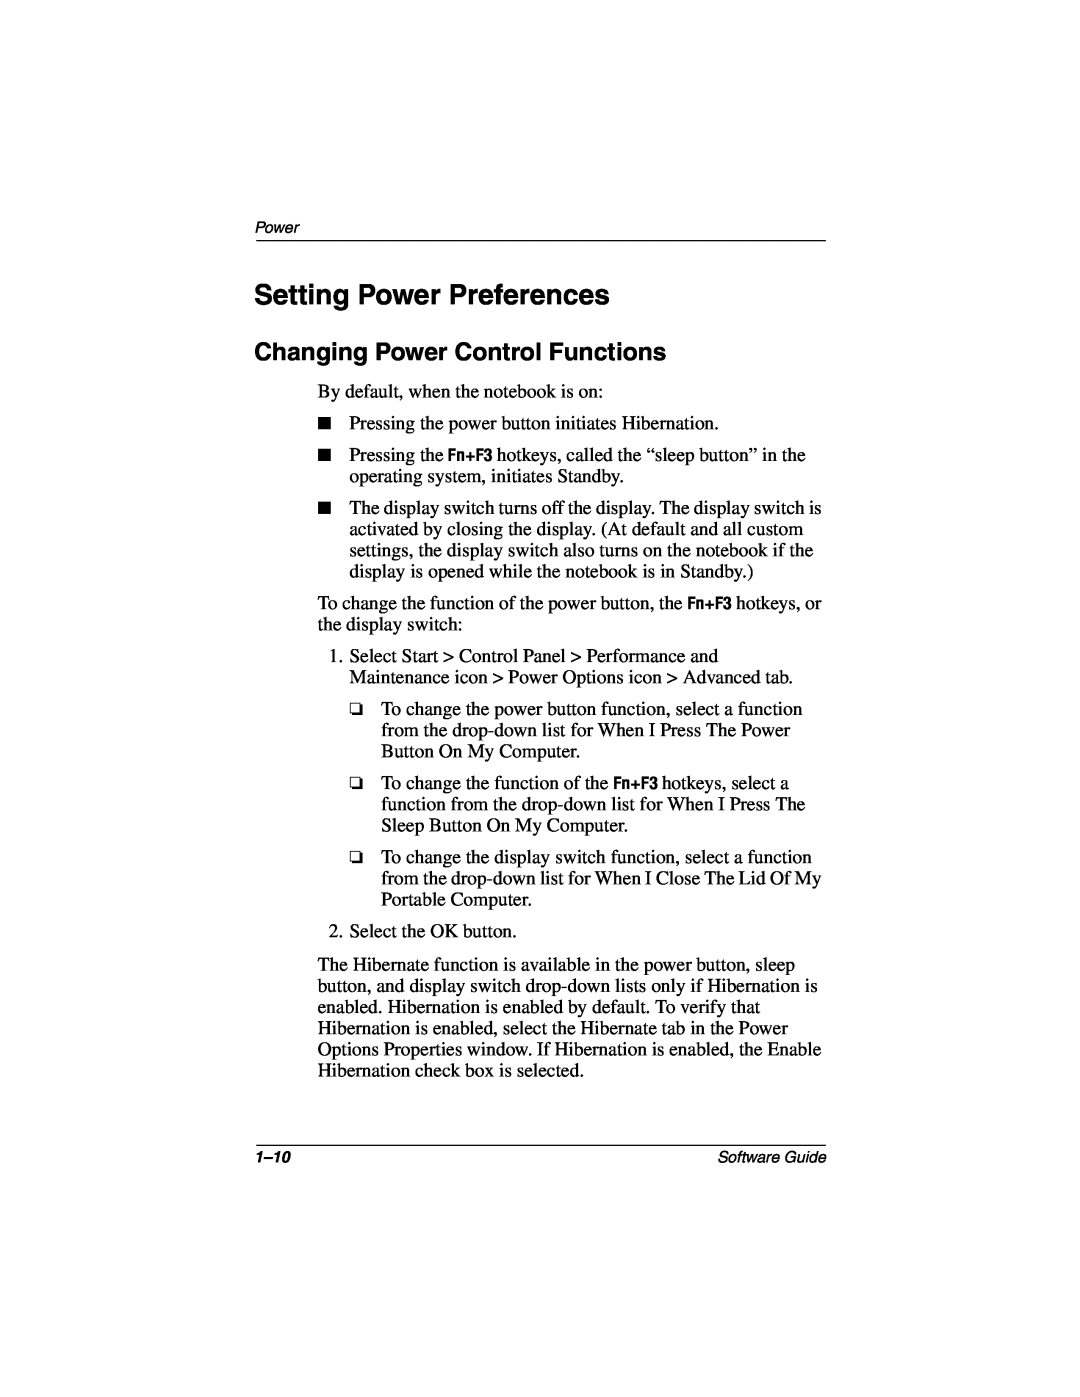 HP 3045US, 3016US, 3017CL, 3015US, 3018CL, 3015CA, 3005US, 3008CL Setting Power Preferences, Changing Power Control Functions 